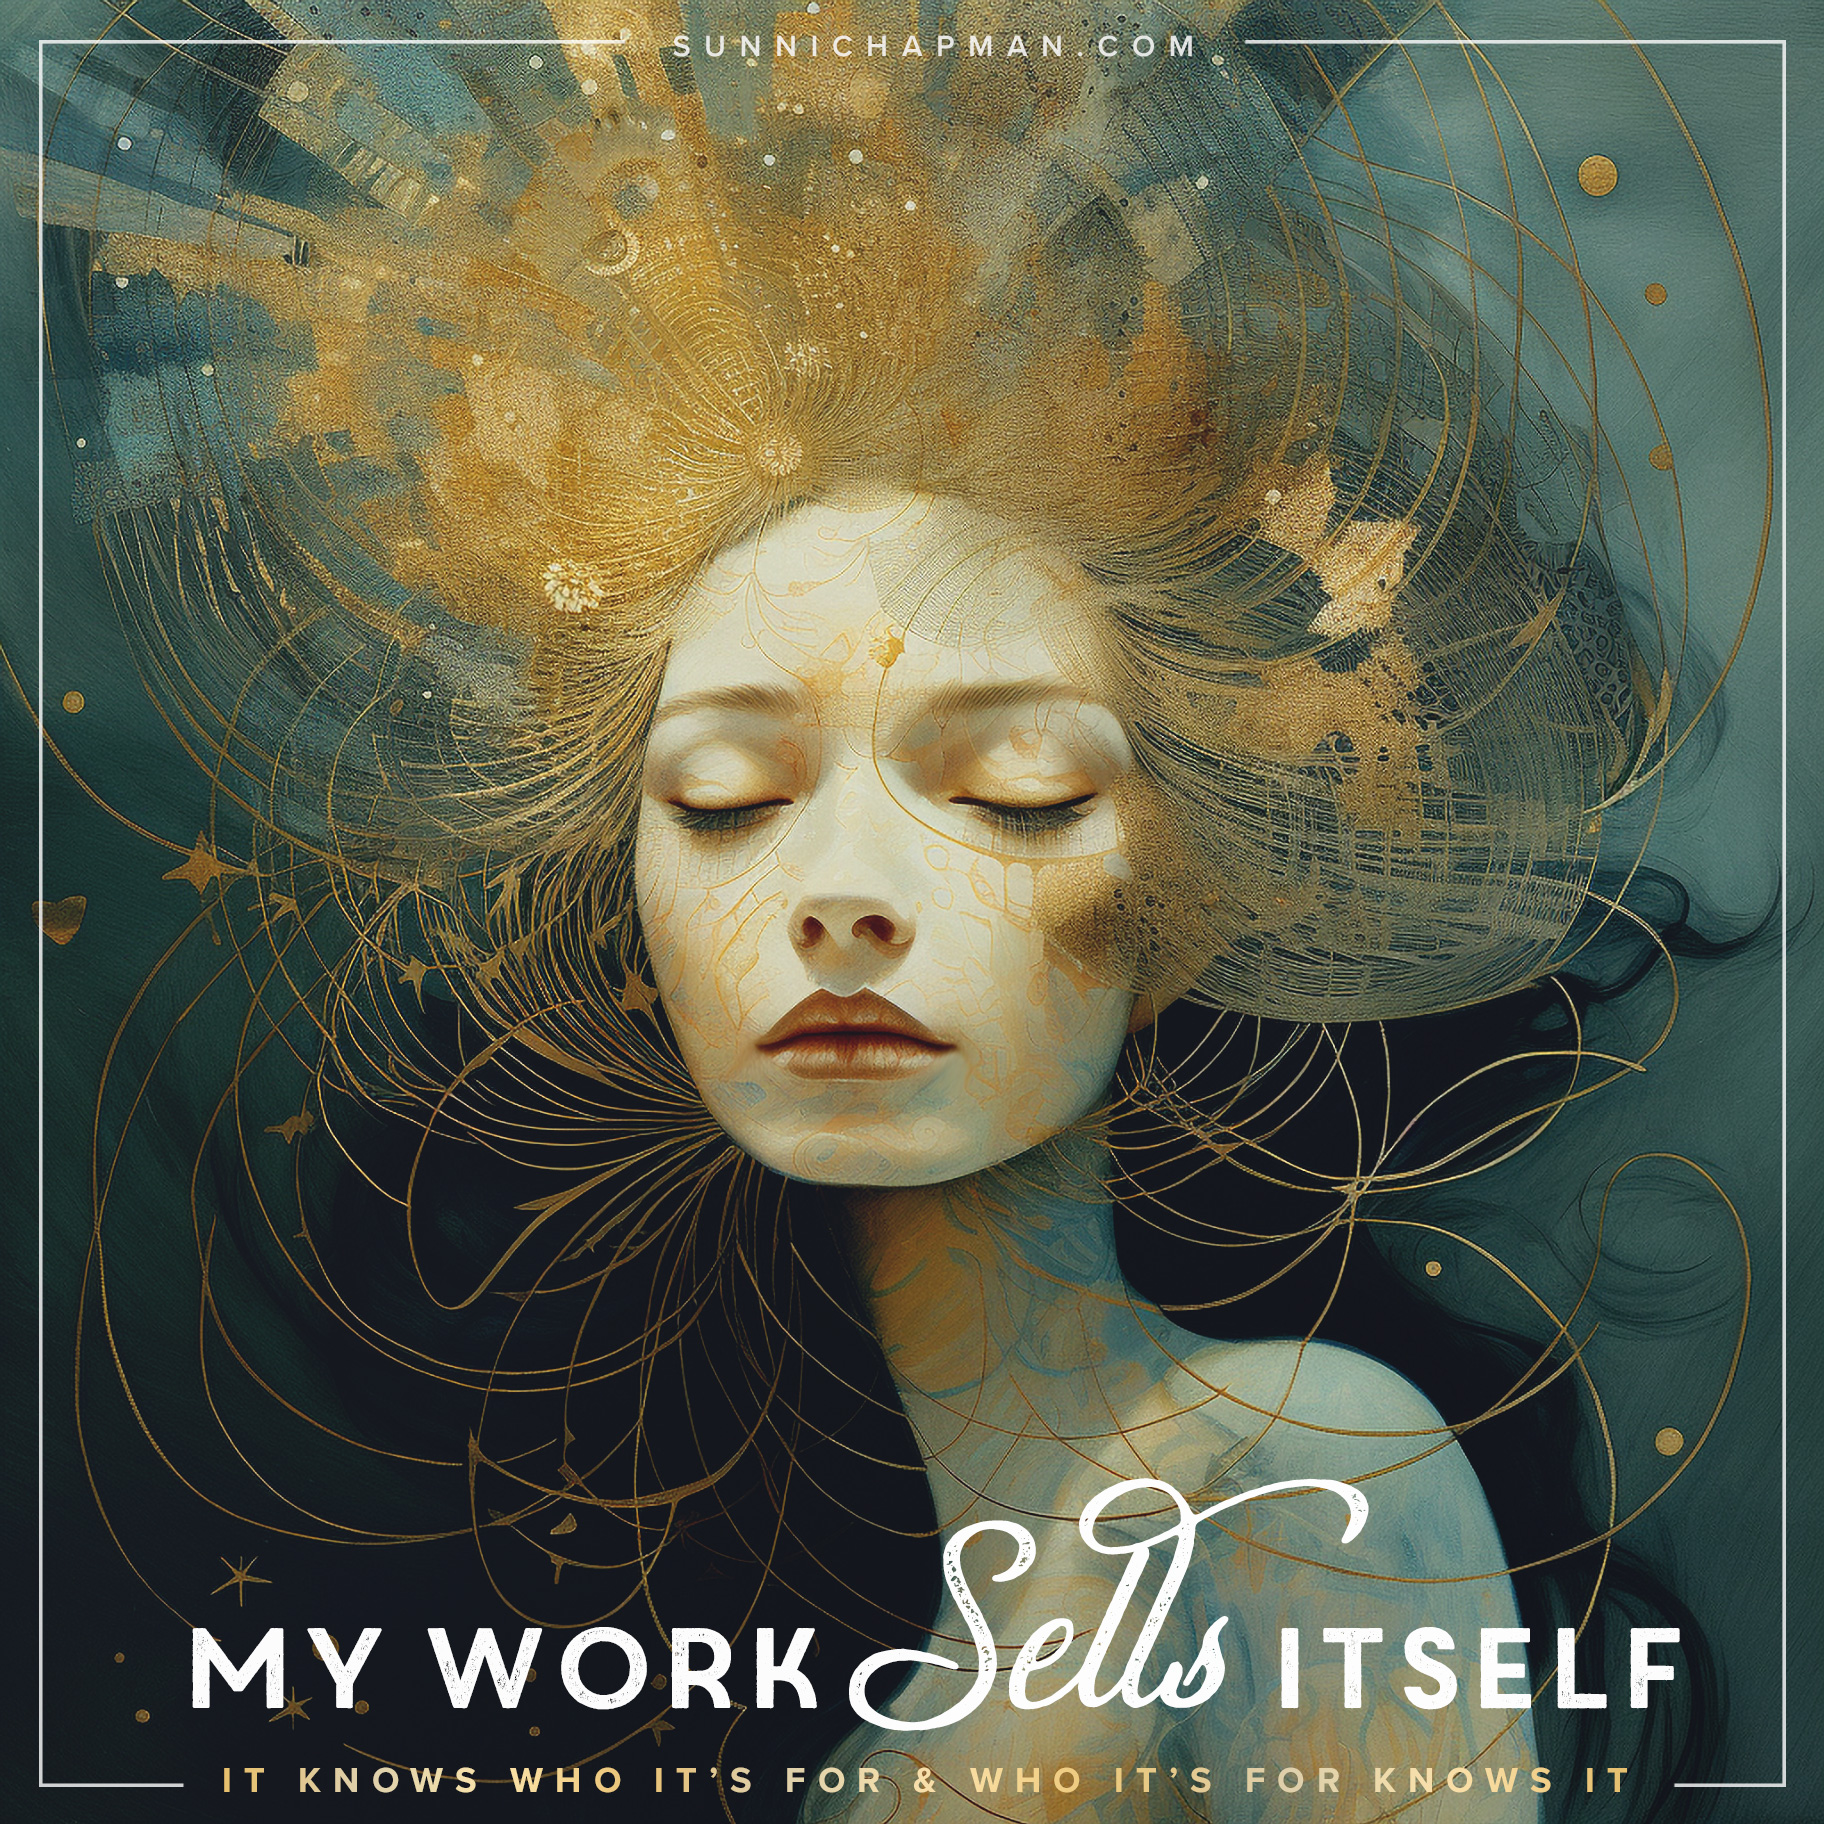 Artistic image showing a woman with closed eyes, her head surrounded by an elaborate golden halo with intricate patterns and stars, suggesting a sense of creativity and inspiration. Text over the image reads 'MY WORK SELLS ITSELF' in large, bold letters, followed by 'IT KNOWS WHO IT'S FOR & WHO IT'S FOR KNOWS IT' in smaller text. The website 'SUNNICHAPMAN.COM' is positioned at the top.